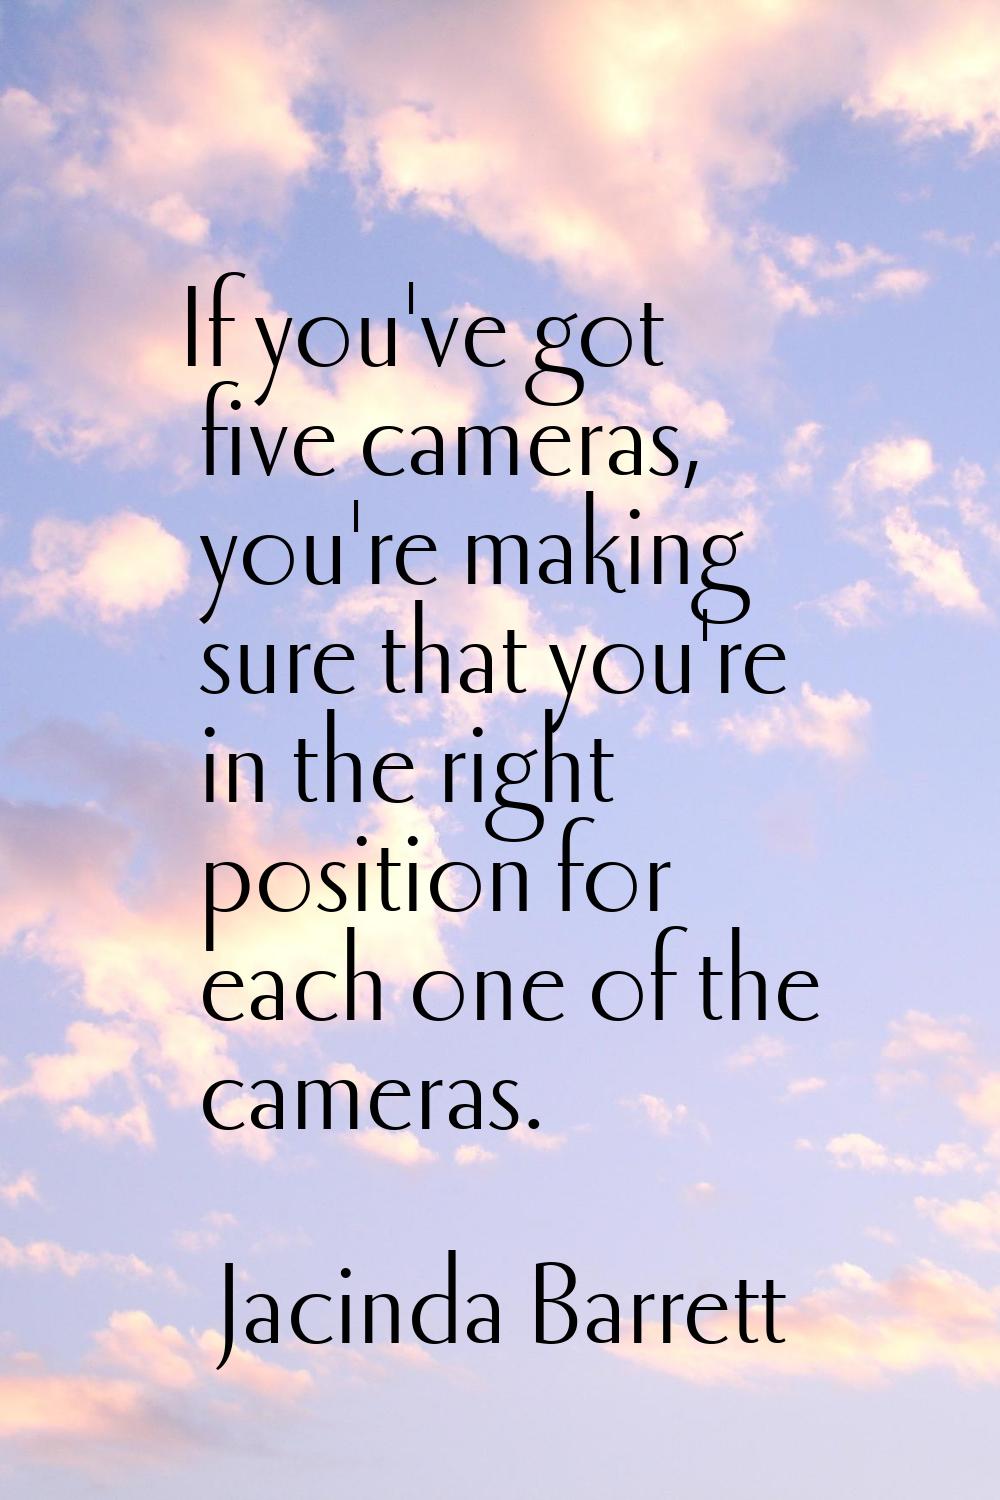 If you've got five cameras, you're making sure that you're in the right position for each one of th